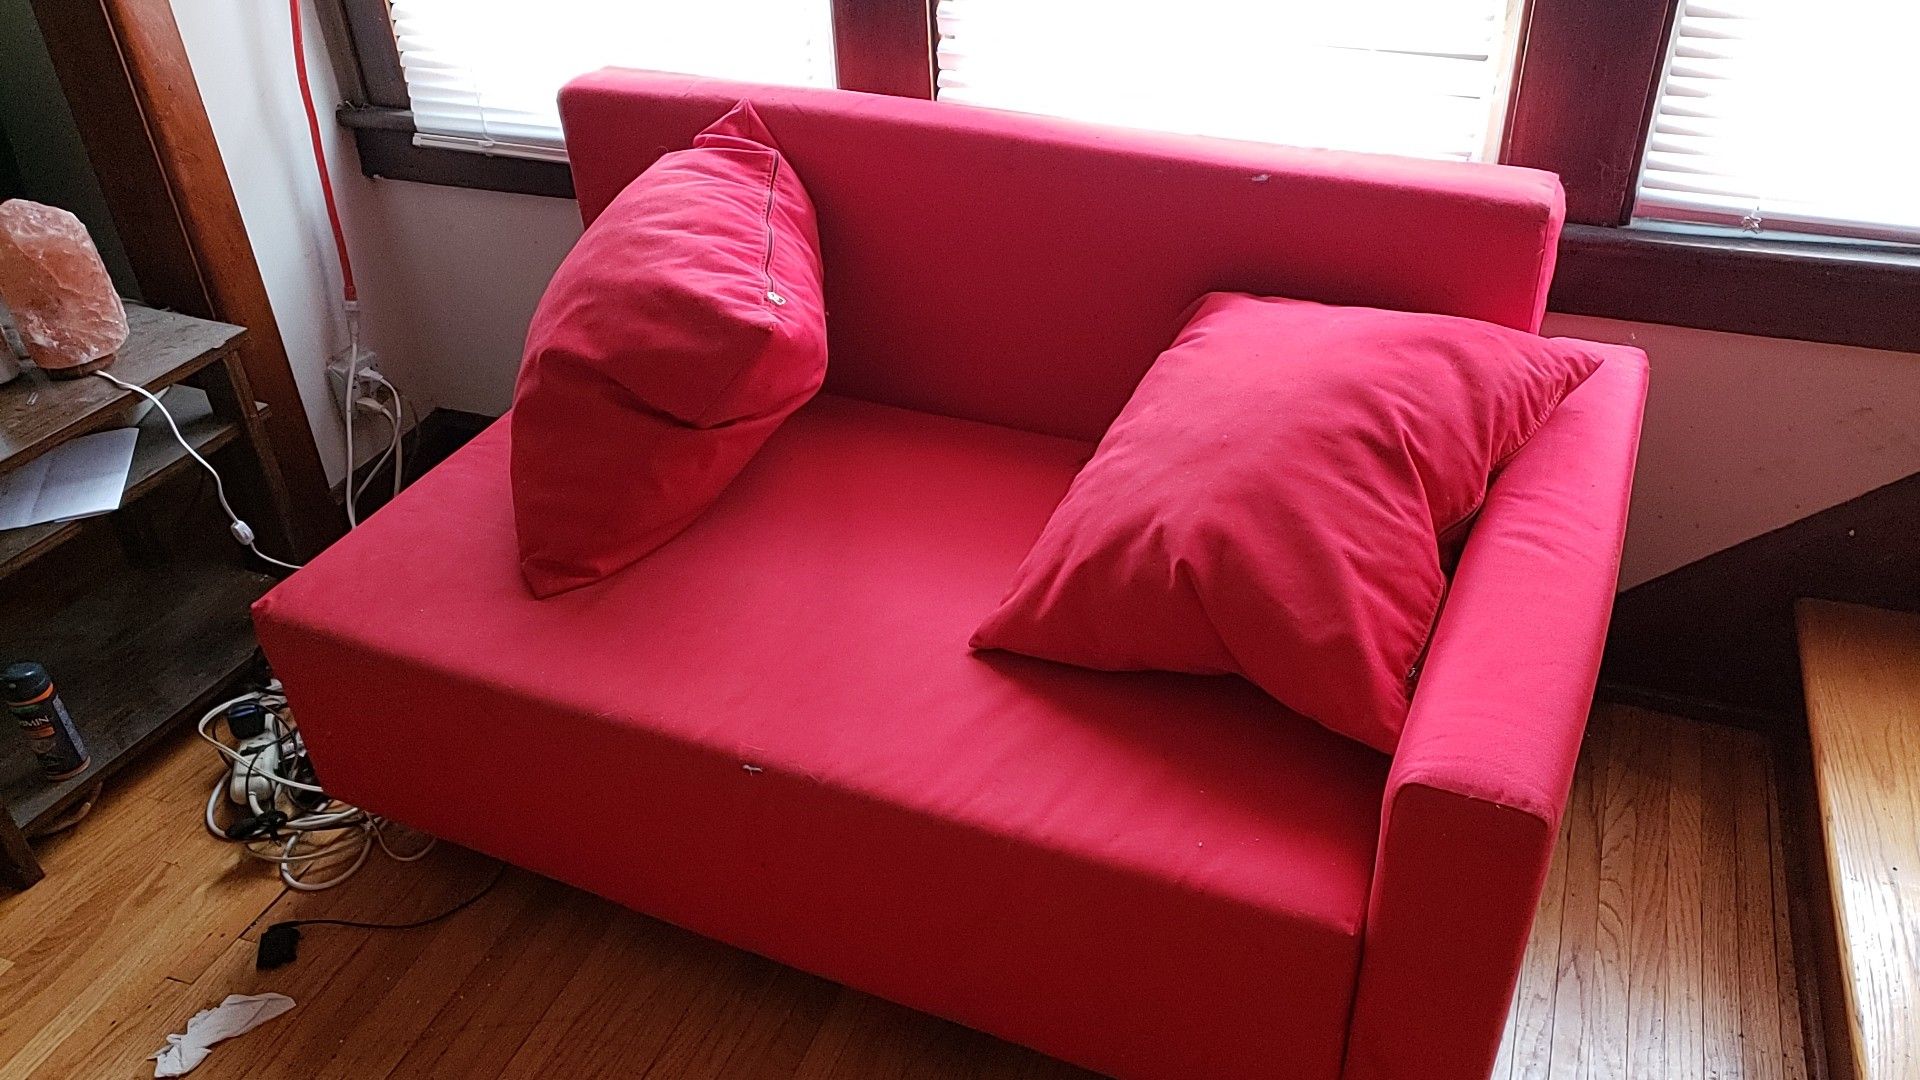 Red Ikea couch-2 piece sectional